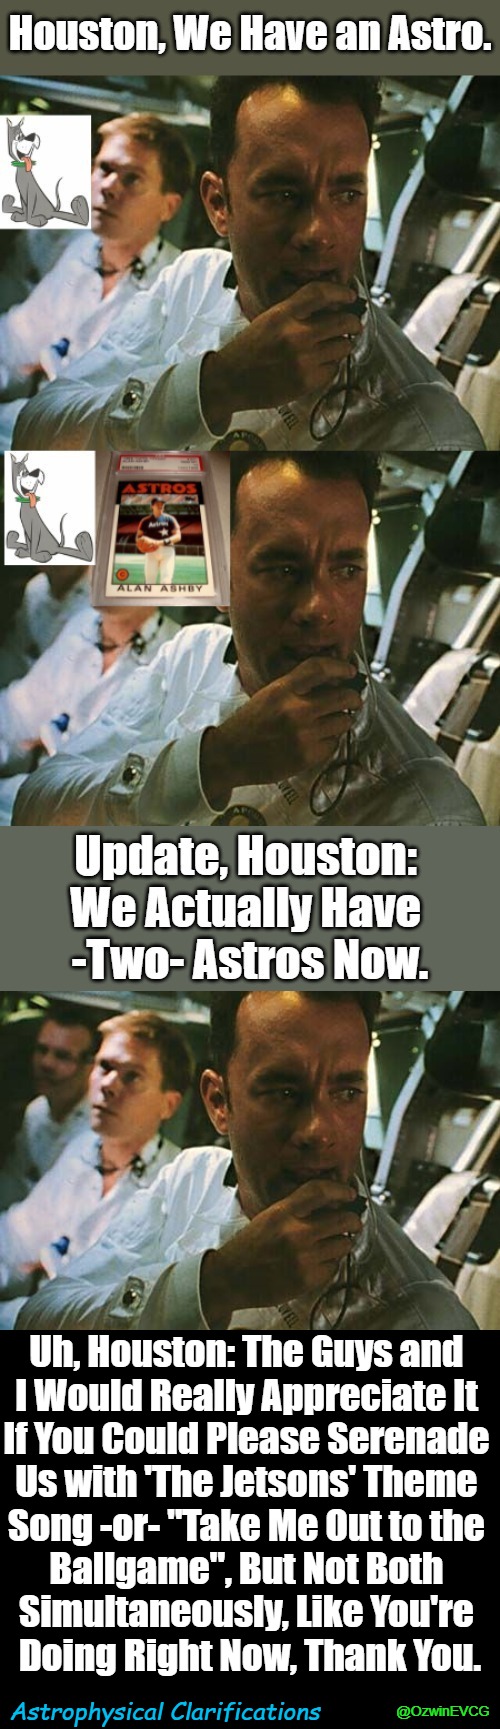 Astrophysical Clarifications | Uh, Houston: The Guys and 

I Would Really Appreciate It 

If You Could Please Serenade 

Us with 'The Jetsons' Theme 

Song -or- "Take Me Out to the 

Ballgame", But Not Both 

Simultaneously, Like You're 

Doing Right Now, Thank You. Astrophysical Clarifications; @OzwinEVCG | image tagged in houston we have a problem,baseball,eyeroll,dogs,group project,communication breakdown | made w/ Imgflip meme maker